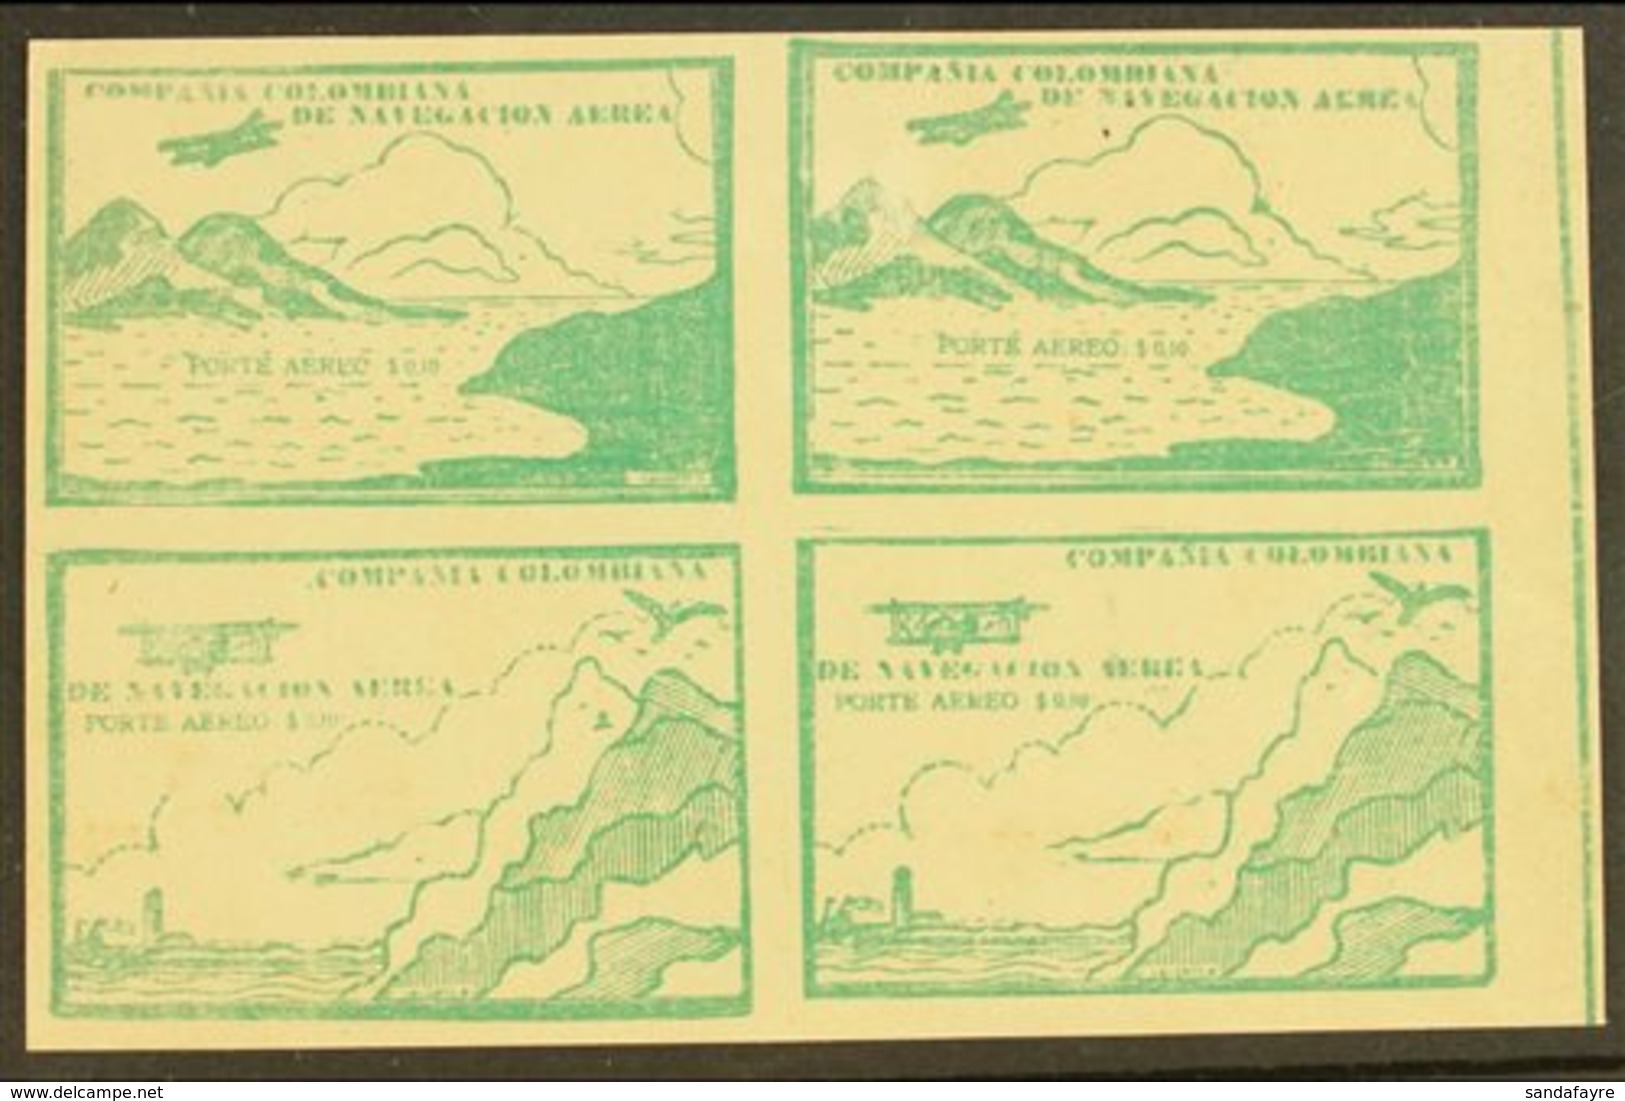 PRIVATE AIRS - COMPANIA COLOMBIANA DE NAVEGACION AREA 1920 (Oct) 10c Green "Sea And Mountains" And "Cliffs And Lighthous - Colombia